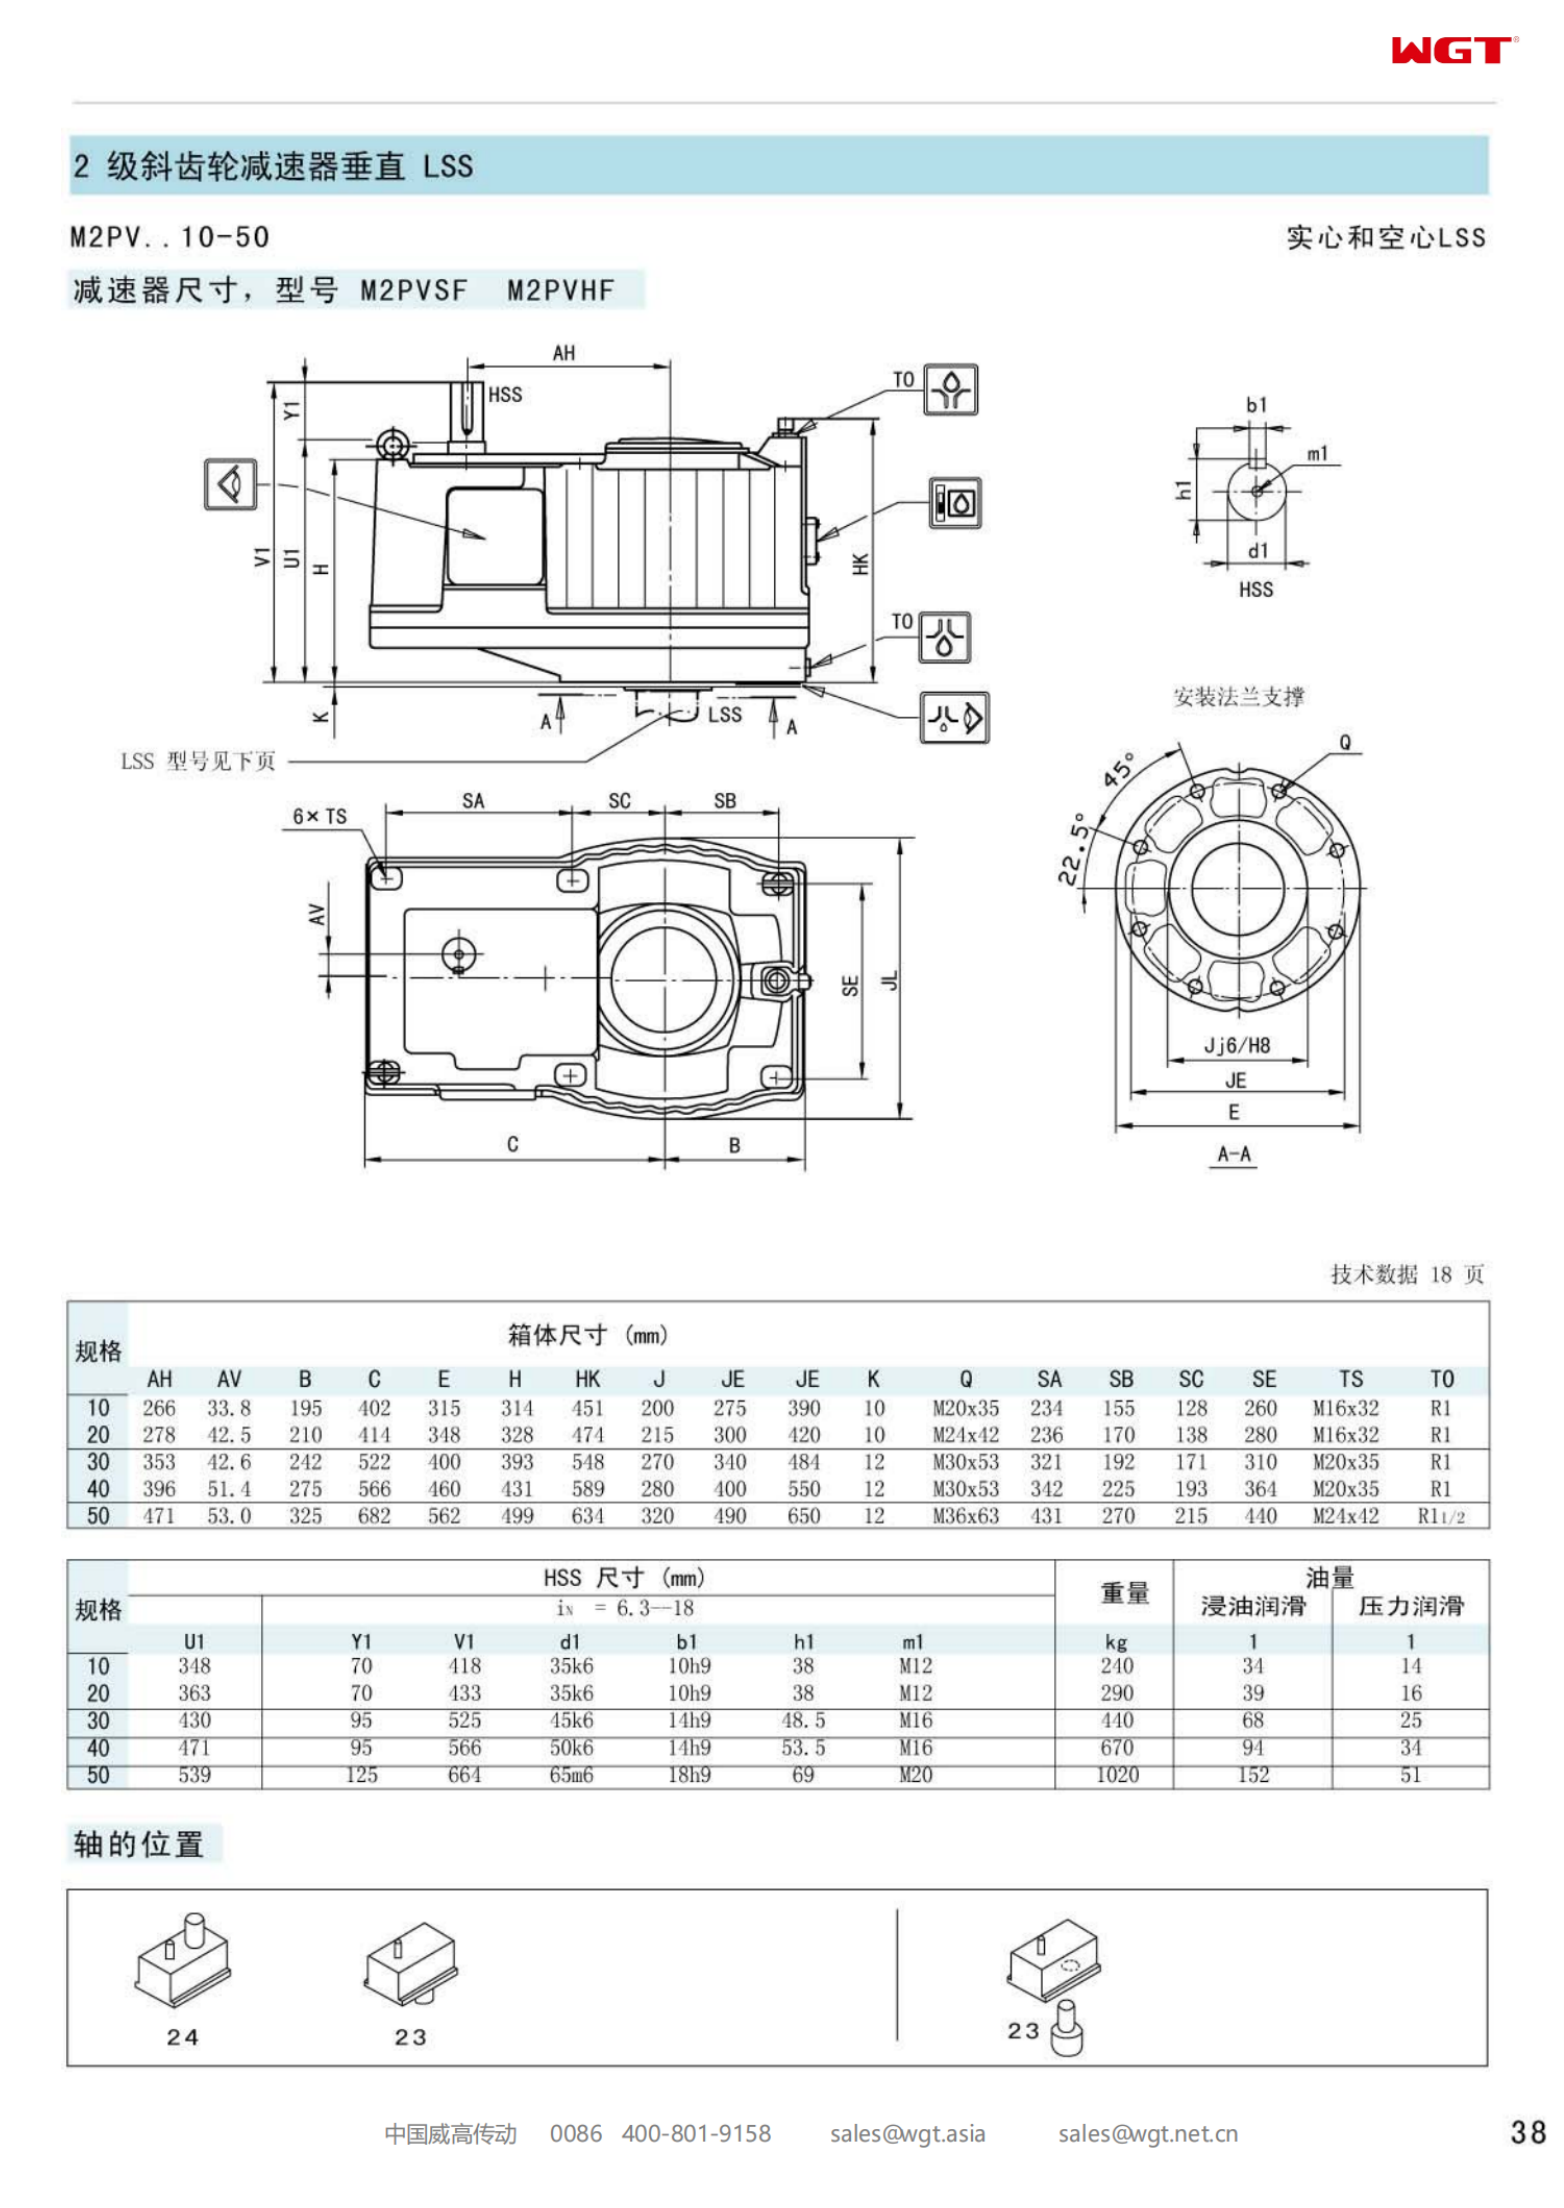 M2PVHF10 Replace_SEW_M_Series Gearbox